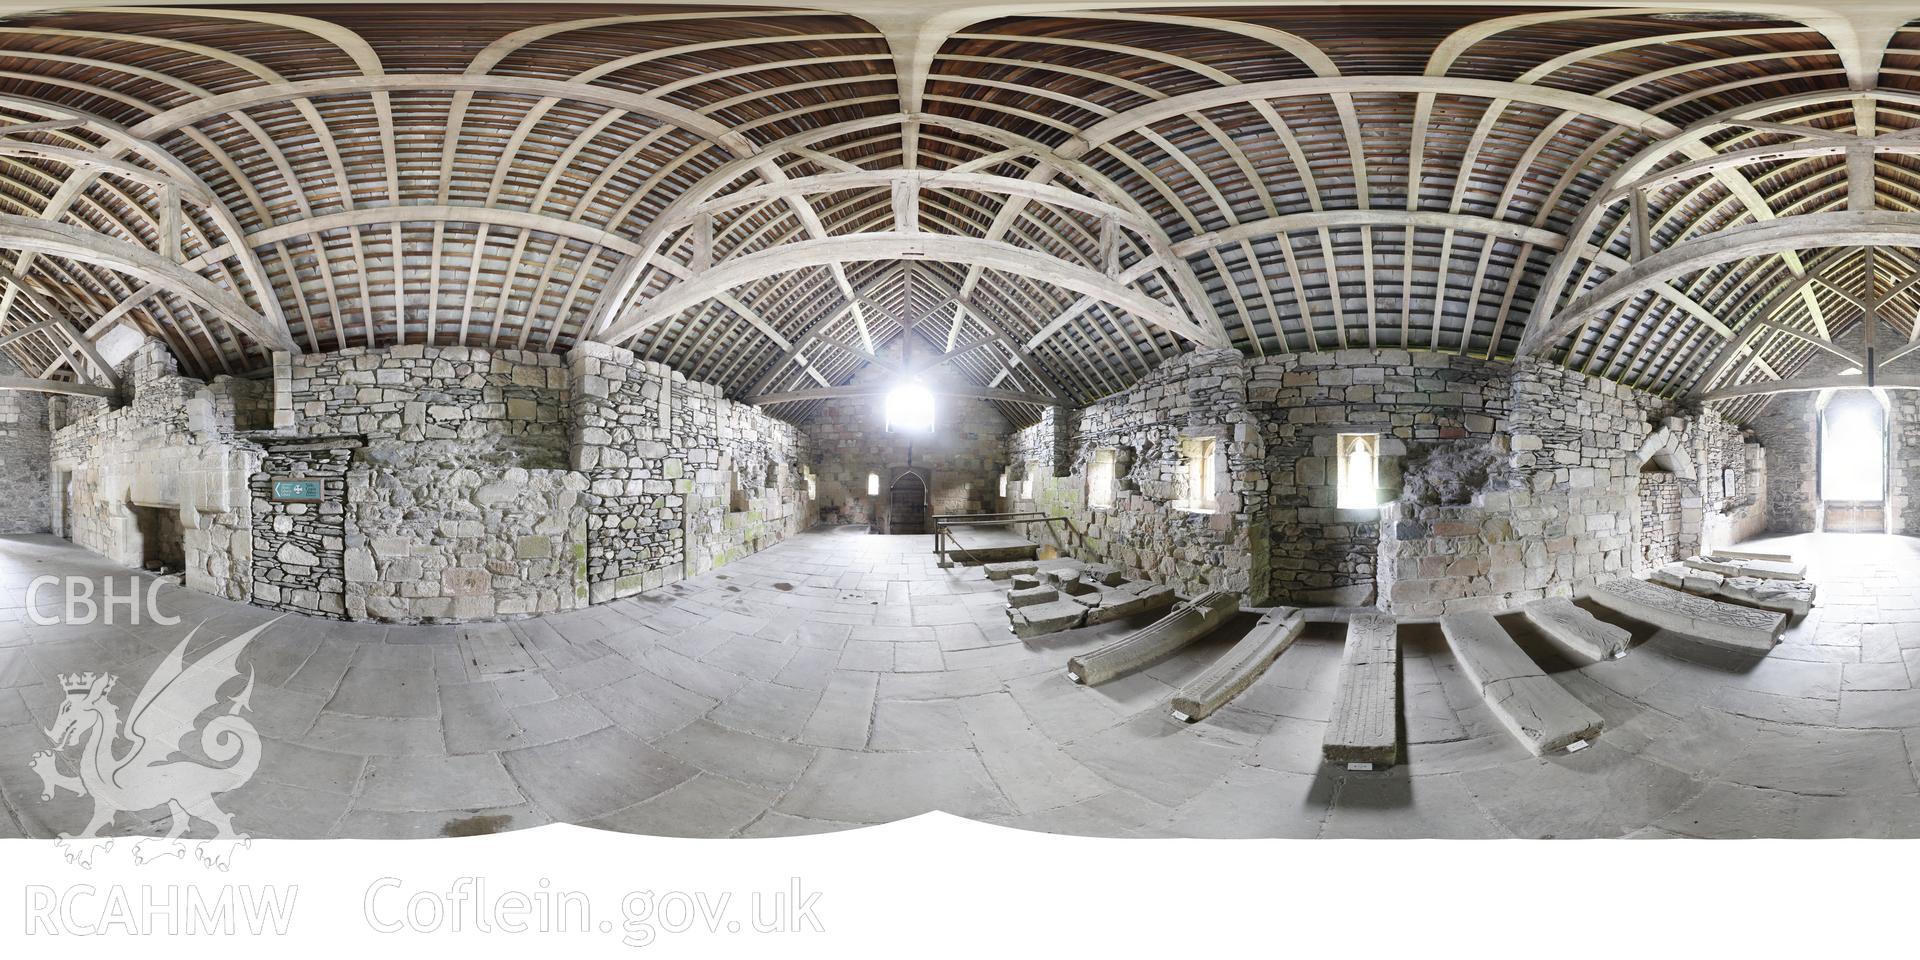 Reduced resolution .tiff file of stitched images in the Dormitory at Valle Crucis Abbey, carried out by Sue Fielding and Rita Singer, July 2017. Produced through European Travellers to Wales project.